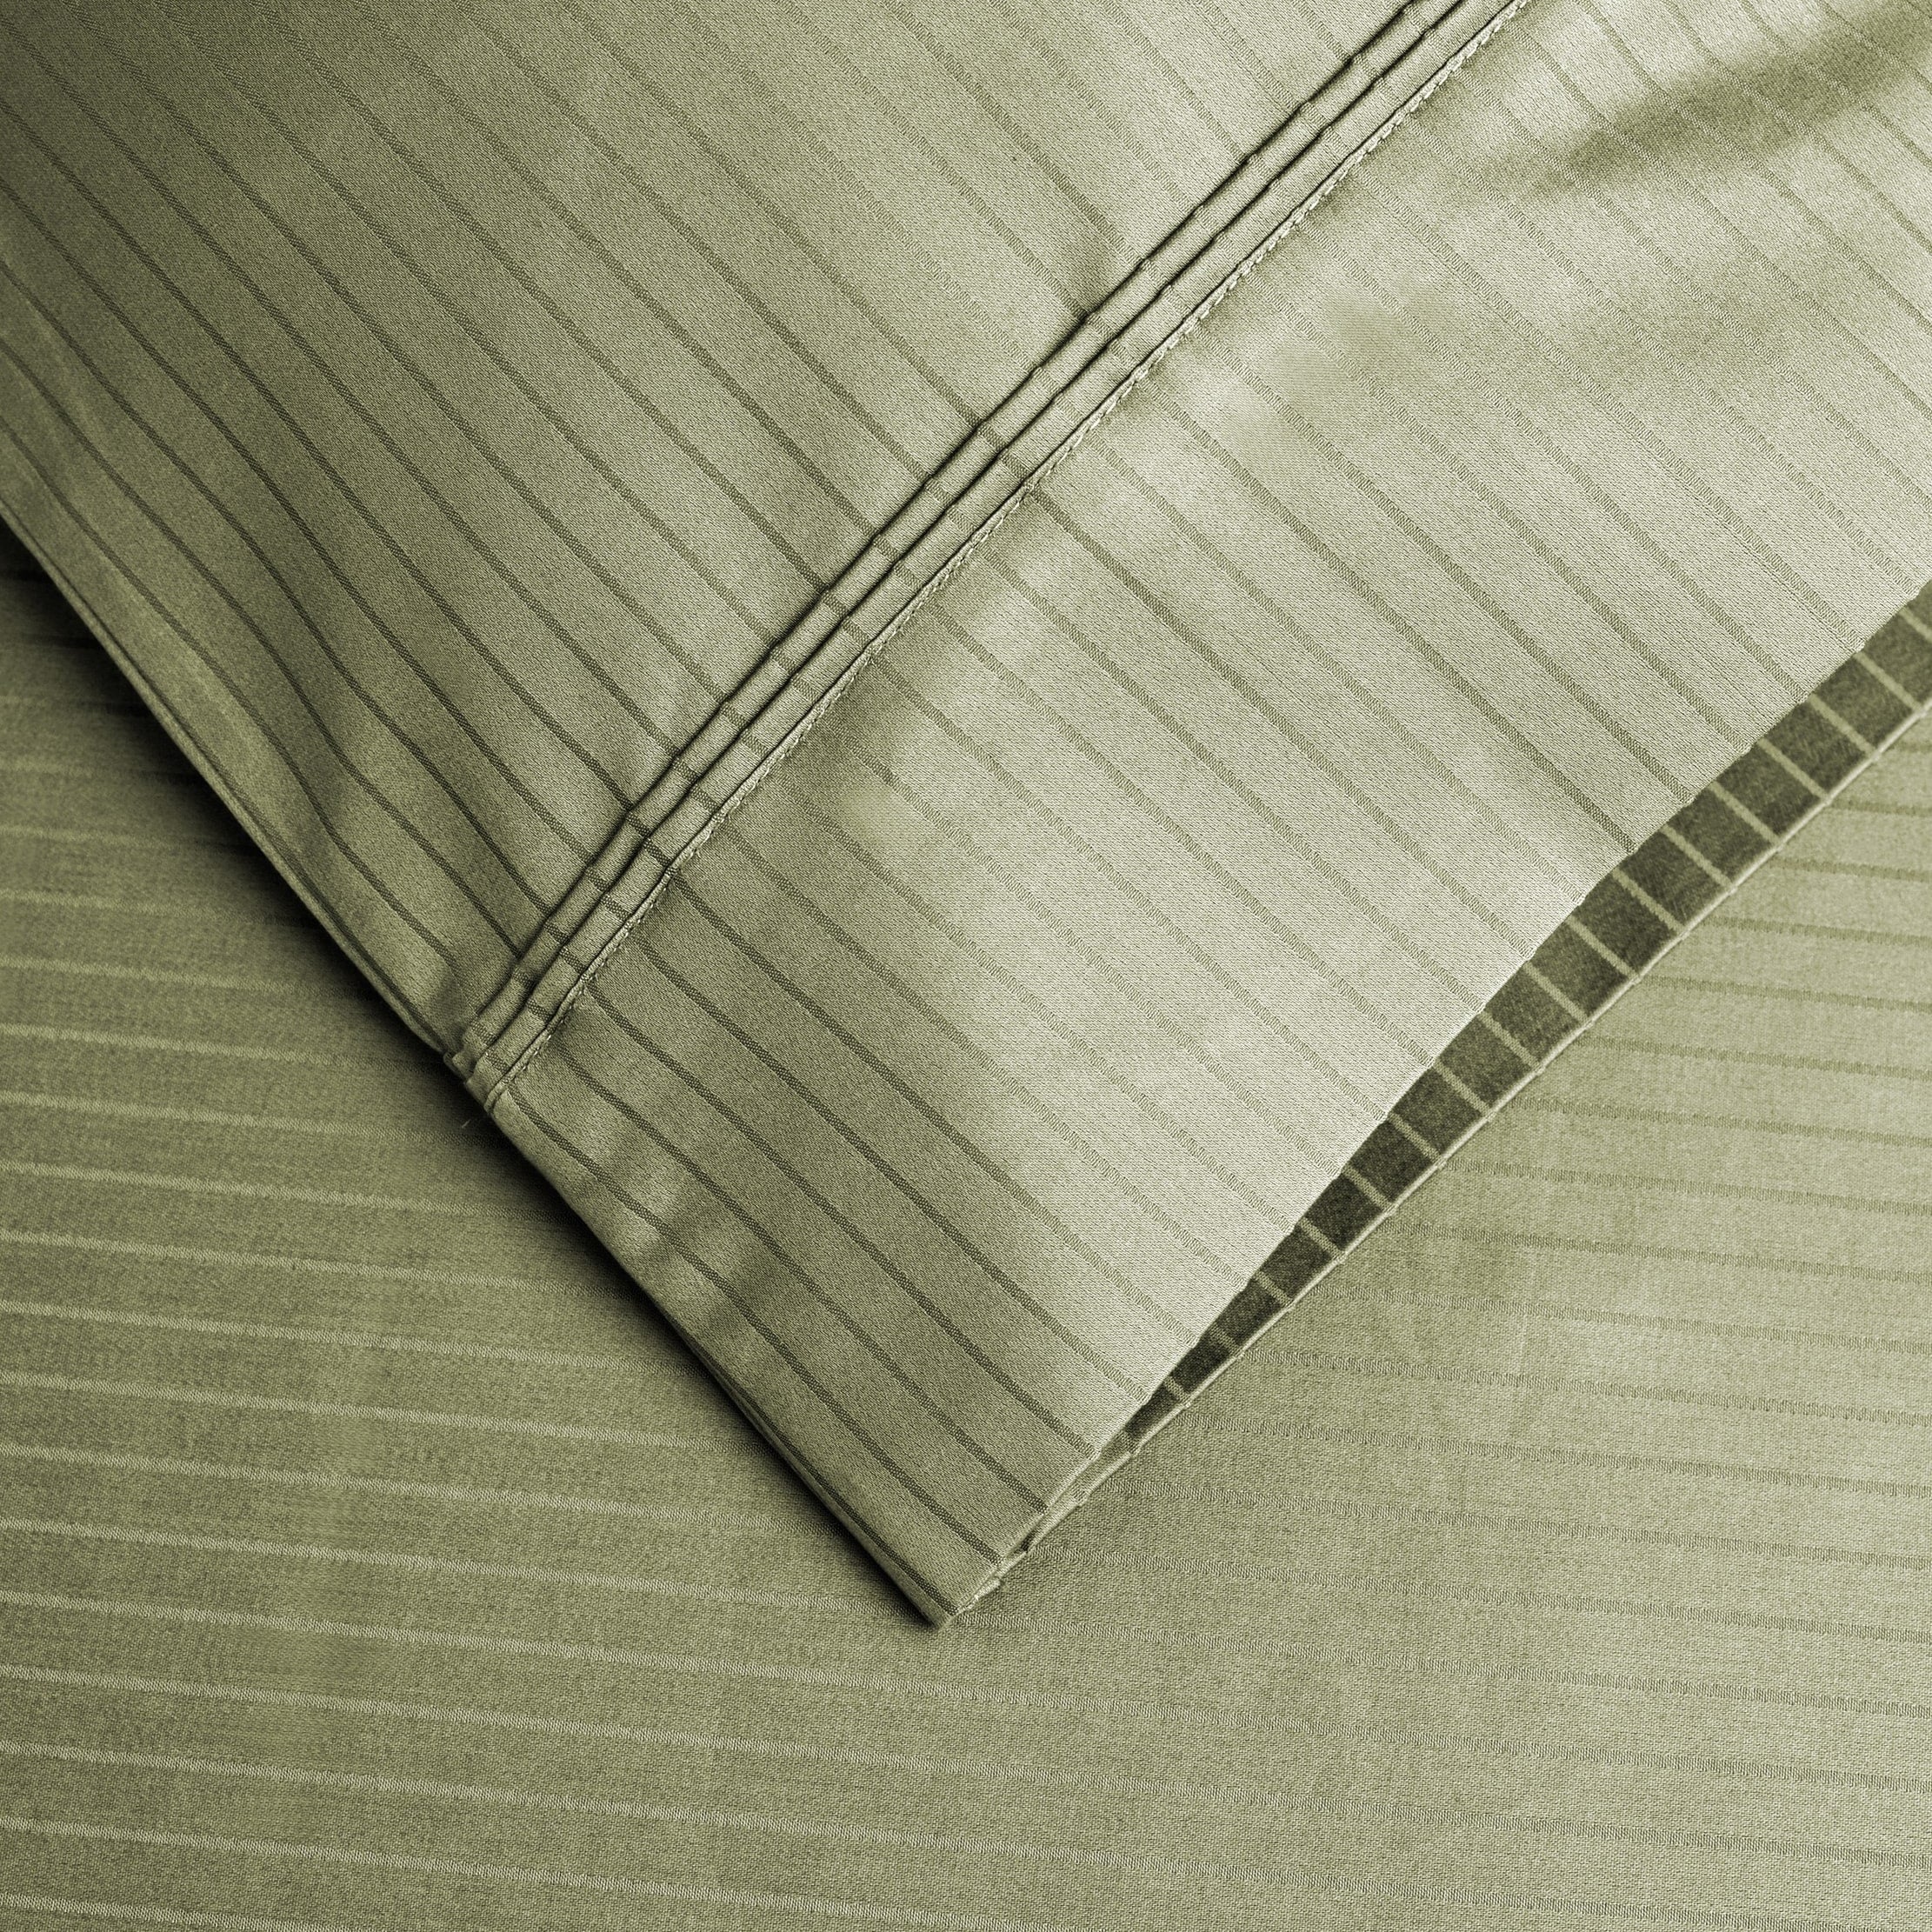 Details about   Cal-King Size 1 Qty Fitted Sheet Ultra Pocket Depth Egyptian Cotton All Stripe 